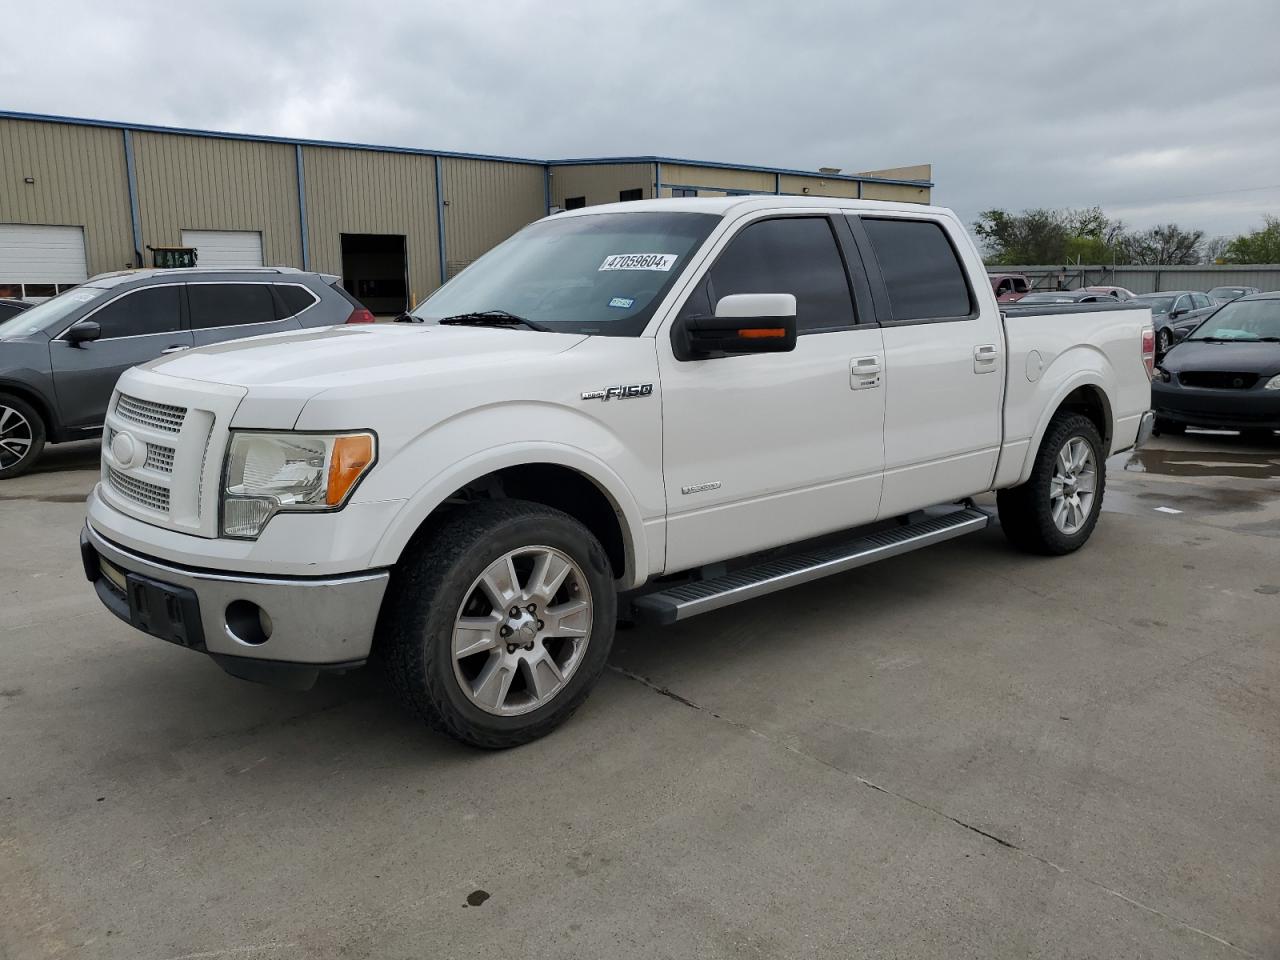 vin: 1FTFW1CT3BFC57903 1FTFW1CT3BFC57903 2011 ford f-150 3500 for Sale in 75172 1528, Tx - Dallas South, Wilmer, USA